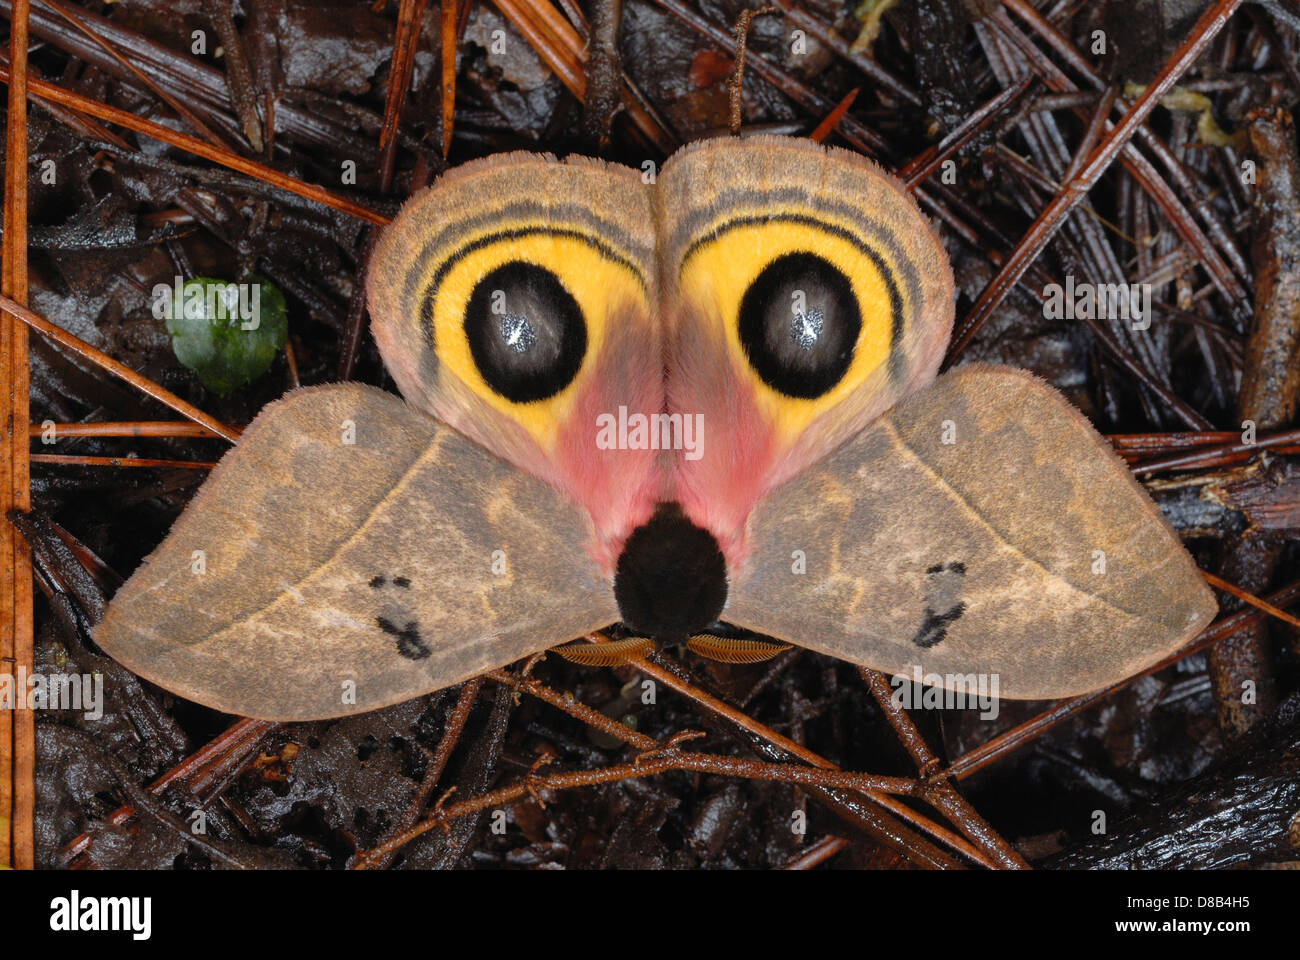 Owl Moth (Automeris belti) showing defensive eyes and 'Opossum Face' Stock Photo